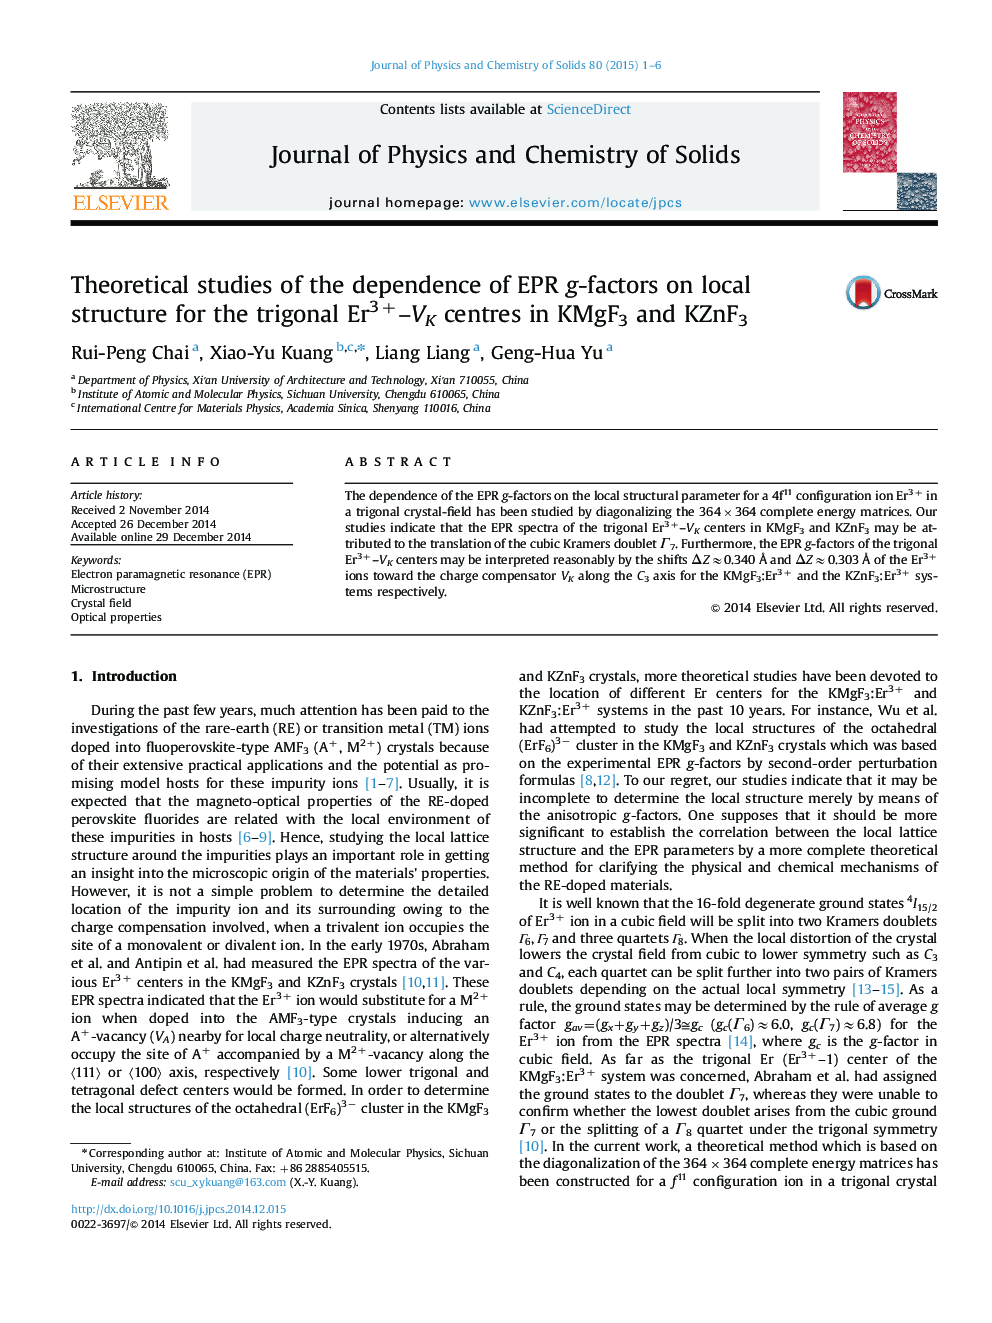 Theoretical studies of the dependence of EPR g-factors on local structure for the trigonal Er3+–VK centres in KMgF3 and KZnF3